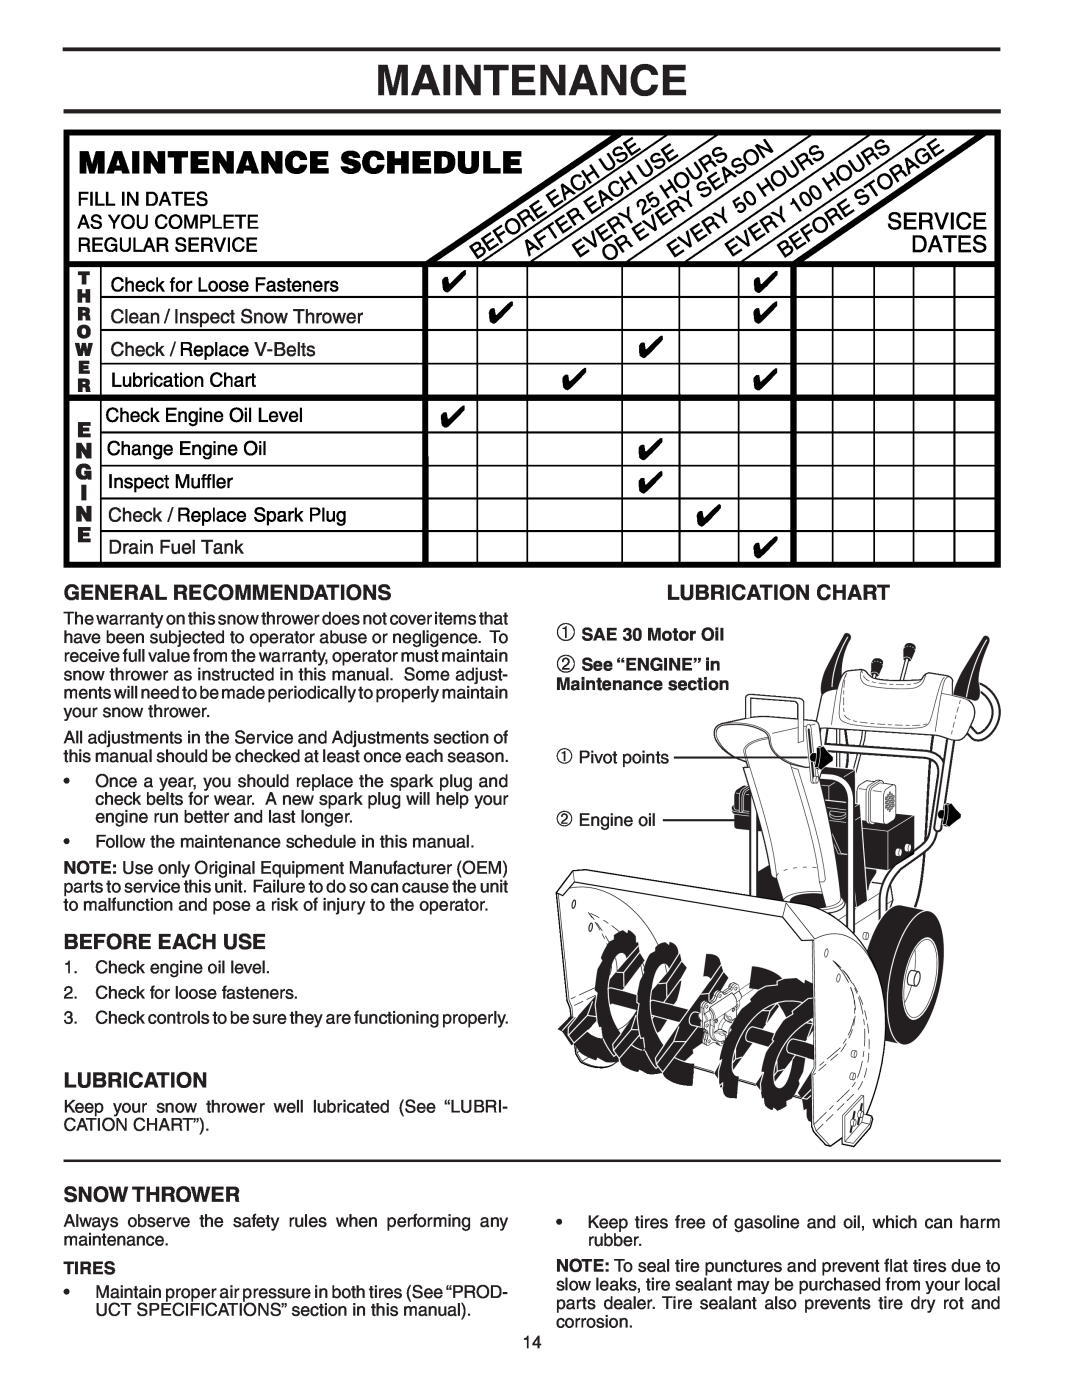 Poulan PP5524ESA Maintenance, General Recommendations, Before Each Use, Snow Thrower, Lubrication Chart, Tires 